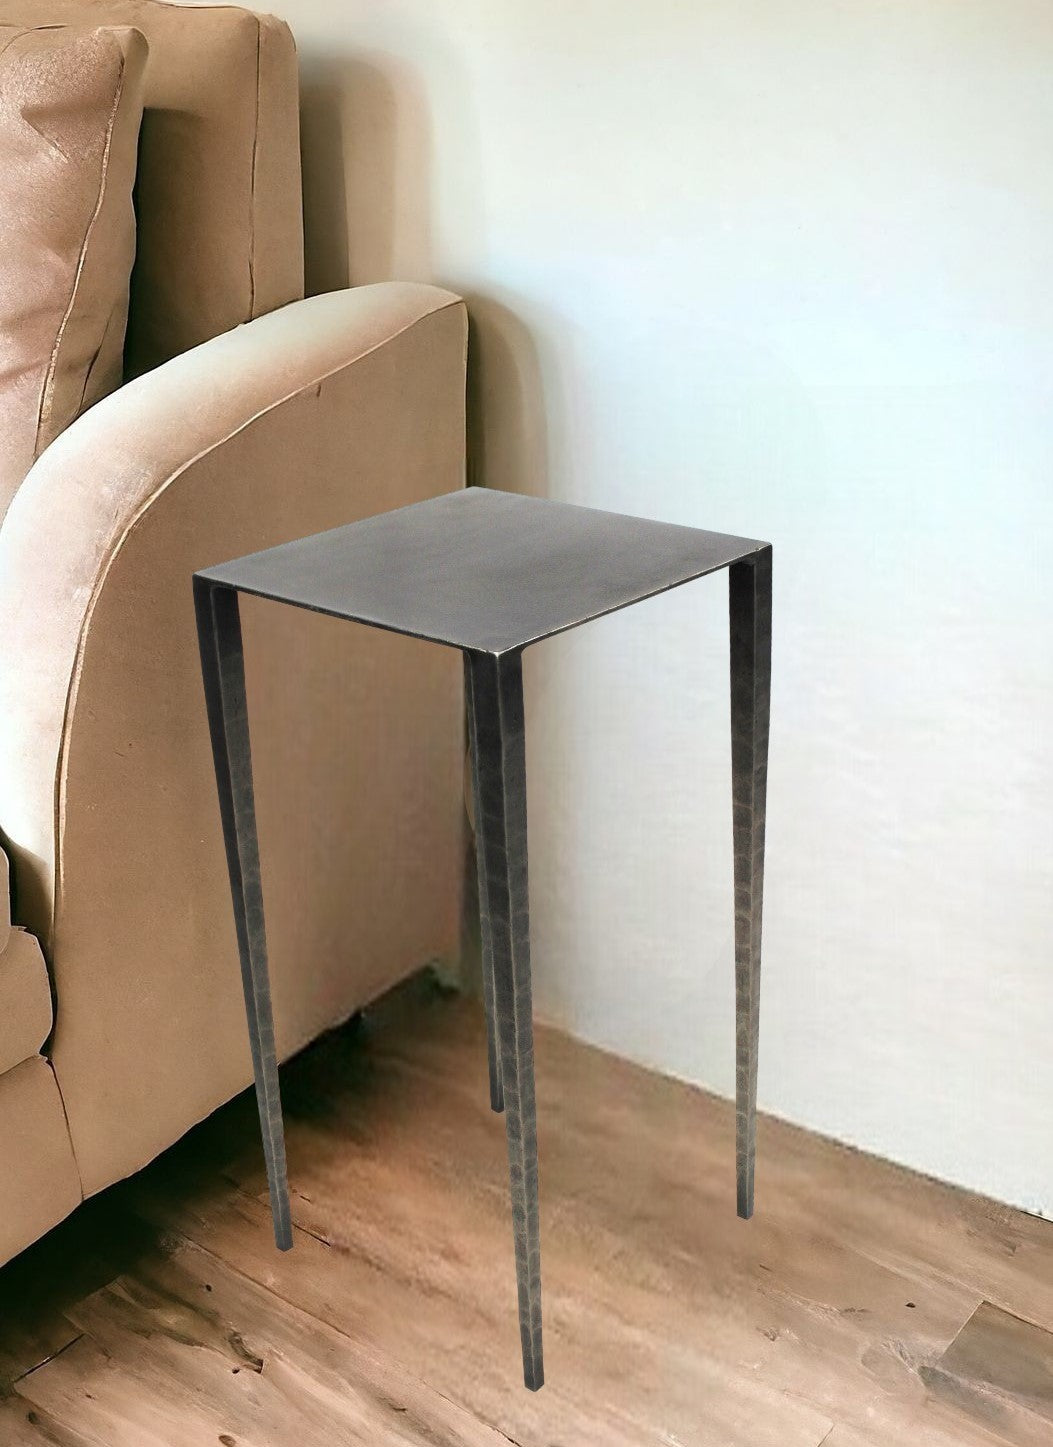 24" Nickel Iron Square End Table